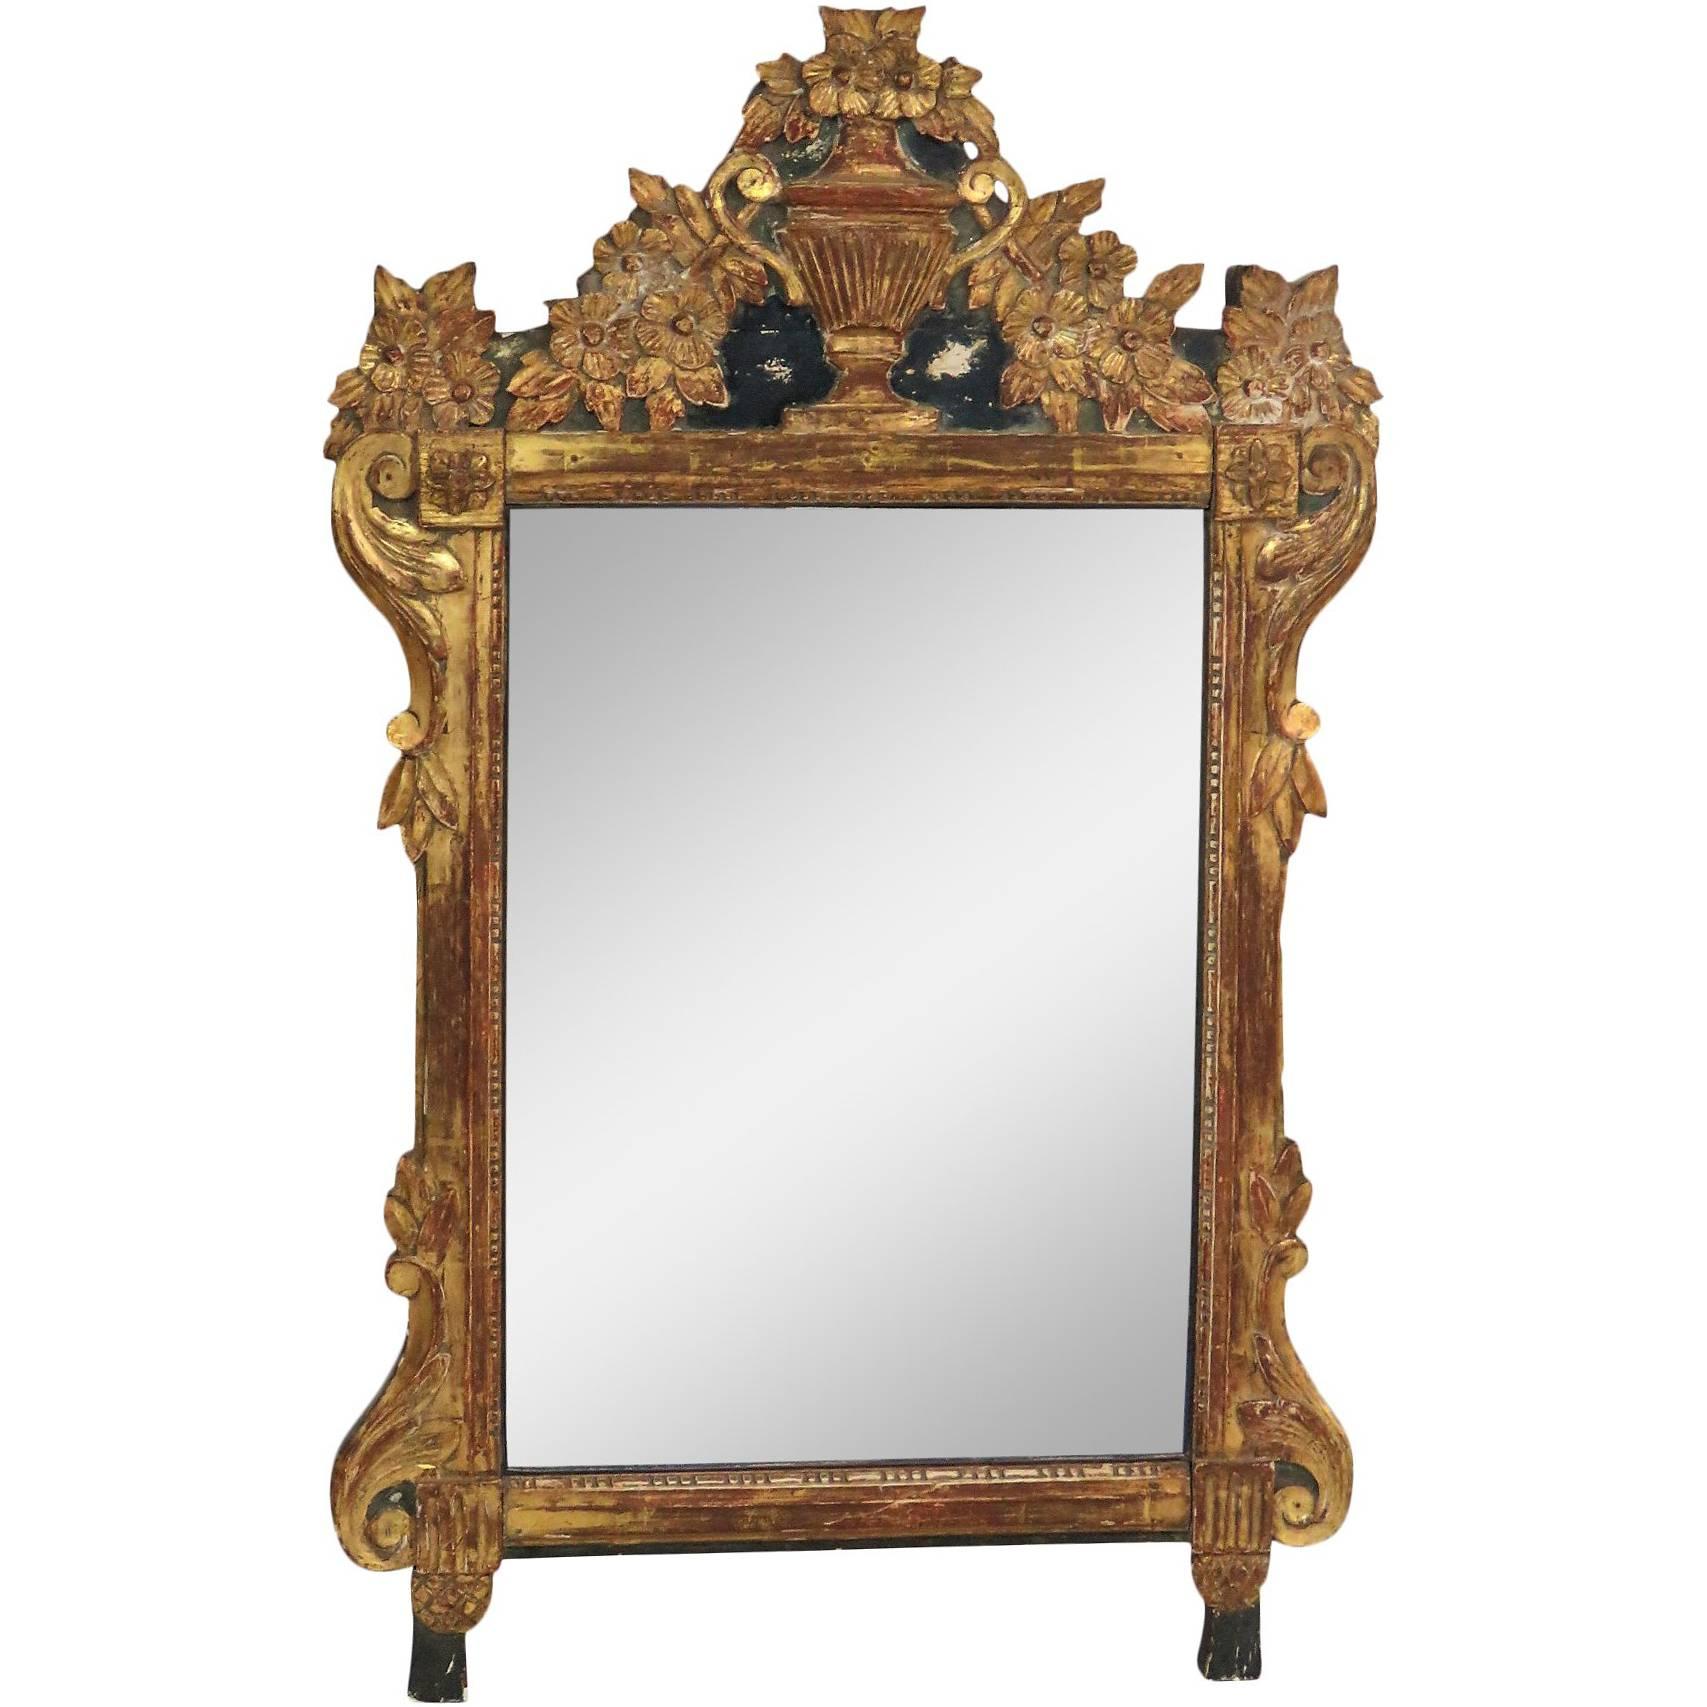 Antique Gilt Carved Hanging Wall Mirror